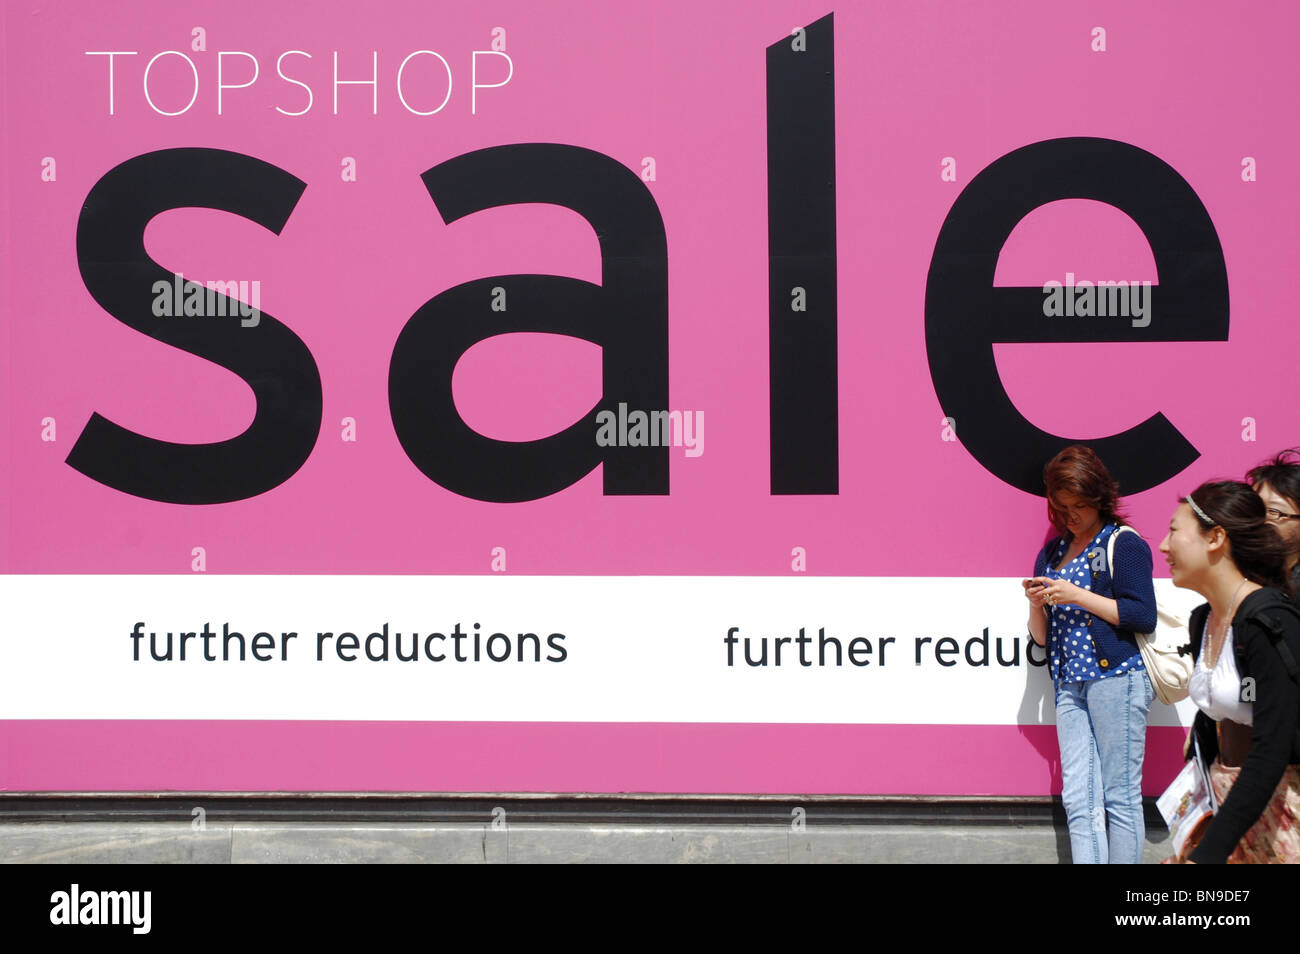 Topshop sale hi-res stock and images - Alamy